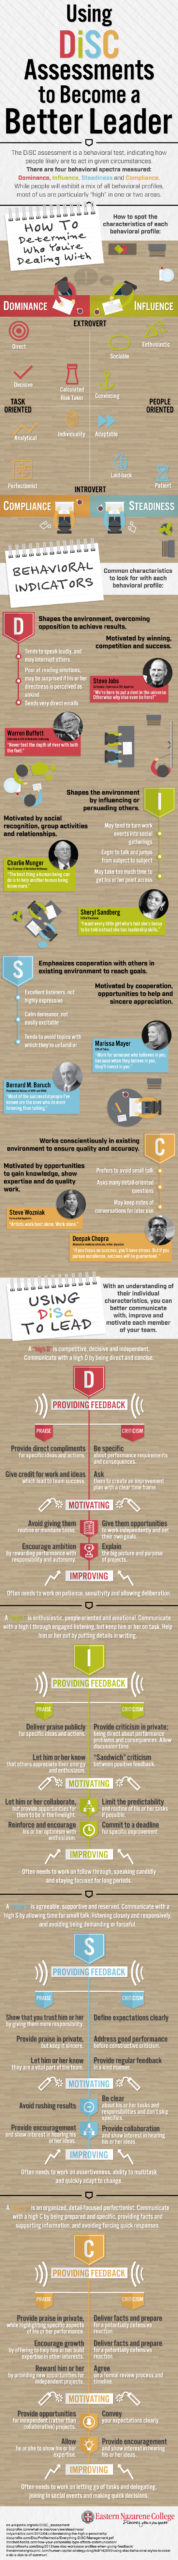 Learn How To Lead Different Types Of Individuals With The “DiSC” System [Infographic]